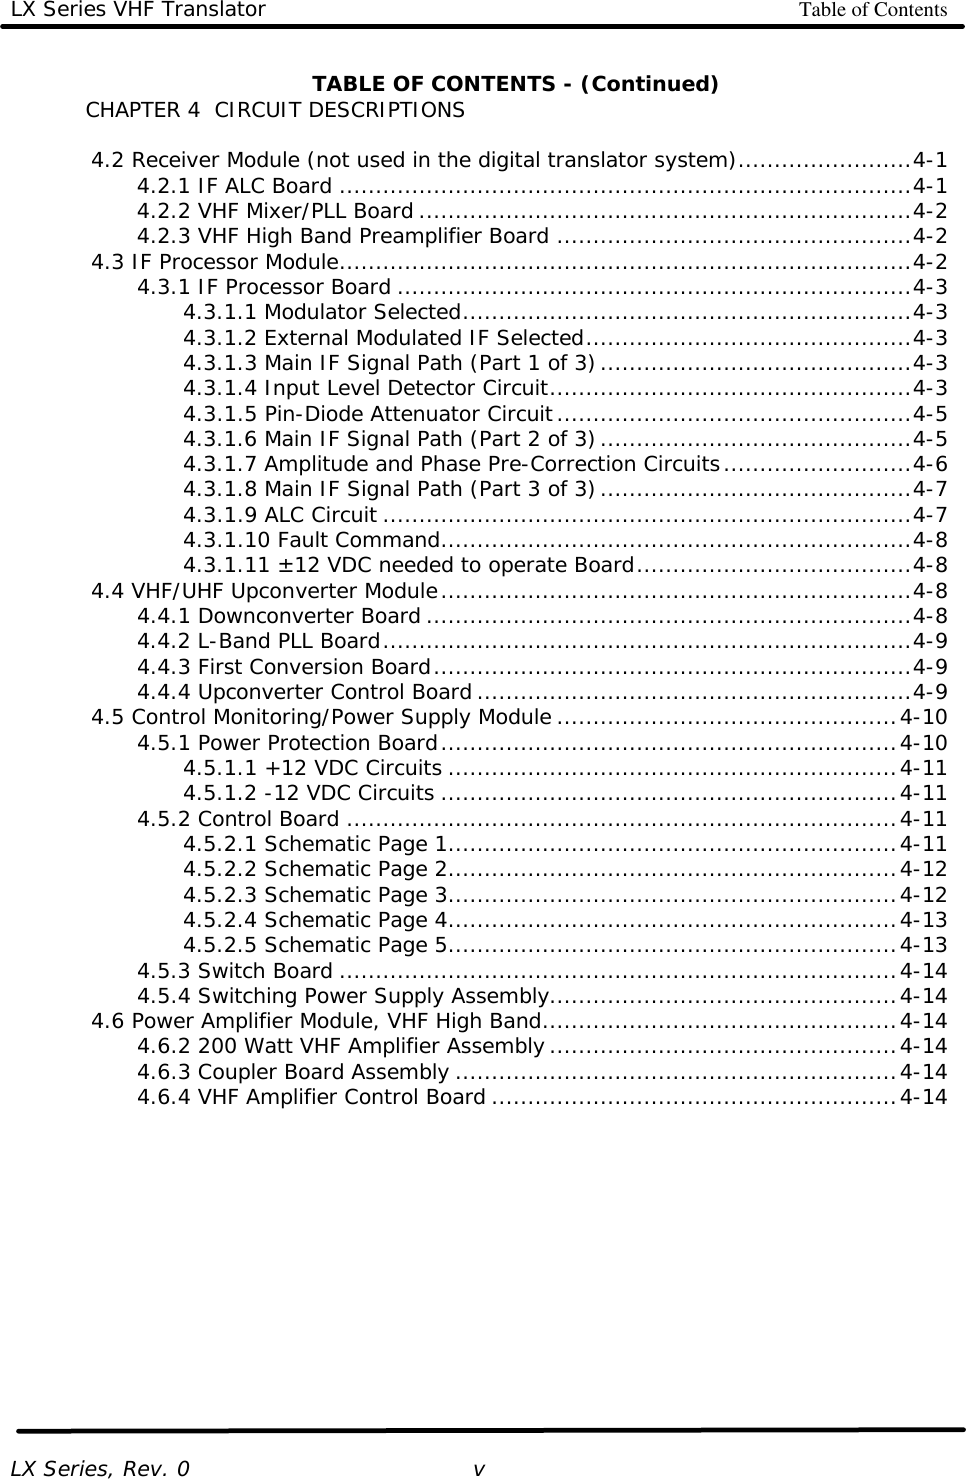 LX Series VHF Translator Table of Contents   LX Series, Rev. 0    v TABLE OF CONTENTS - (Continued) CHAPTER 4  CIRCUIT DESCRIPTIONS   4.2 Receiver Module (not used in the digital translator system)........................4-1     4.2.1 IF ALC Board ...............................................................................4-1     4.2.2 VHF Mixer/PLL Board ....................................................................4-2     4.2.3 VHF High Band Preamplifier Board .................................................4-2  4.3 IF Processor Module...............................................................................4-2     4.3.1 IF Processor Board .......................................................................4-3     4.3.1.1 Modulator Selected..............................................................4-3     4.3.1.2 External Modulated IF Selected.............................................4-3     4.3.1.3 Main IF Signal Path (Part 1 of 3)...........................................4-3     4.3.1.4 Input Level Detector Circuit..................................................4-3     4.3.1.5 Pin-Diode Attenuator Circuit.................................................4-5     4.3.1.6 Main IF Signal Path (Part 2 of 3)...........................................4-5     4.3.1.7 Amplitude and Phase Pre-Correction Circuits..........................4-6     4.3.1.8 Main IF Signal Path (Part 3 of 3)...........................................4-7     4.3.1.9 ALC Circuit .........................................................................4-7     4.3.1.10 Fault Command.................................................................4-8     4.3.1.11 ±12 VDC needed to operate Board......................................4-8  4.4 VHF/UHF Upconverter Module.................................................................4-8     4.4.1 Downconverter Board ...................................................................4-8     4.4.2 L-Band PLL Board.........................................................................4-9     4.4.3 First Conversion Board..................................................................4-9     4.4.4 Upconverter Control Board ............................................................4-9  4.5 Control Monitoring/Power Supply Module ...............................................4-10     4.5.1 Power Protection Board...............................................................4-10     4.5.1.1 +12 VDC Circuits ..............................................................4-11     4.5.1.2 -12 VDC Circuits ...............................................................4-11     4.5.2 Control Board ............................................................................4-11     4.5.2.1 Schematic Page 1..............................................................4-11     4.5.2.2 Schematic Page 2..............................................................4-12     4.5.2.3 Schematic Page 3..............................................................4-12     4.5.2.4 Schematic Page 4..............................................................4-13     4.5.2.5 Schematic Page 5..............................................................4-13     4.5.3 Switch Board .............................................................................4-14     4.5.4 Switching Power Supply Assembly................................................4-14  4.6 Power Amplifier Module, VHF High Band.................................................4-14     4.6.2 200 Watt VHF Amplifier Assembly................................................4-14     4.6.3 Coupler Board Assembly .............................................................4-14     4.6.4 VHF Amplifier Control Board ........................................................4-14 